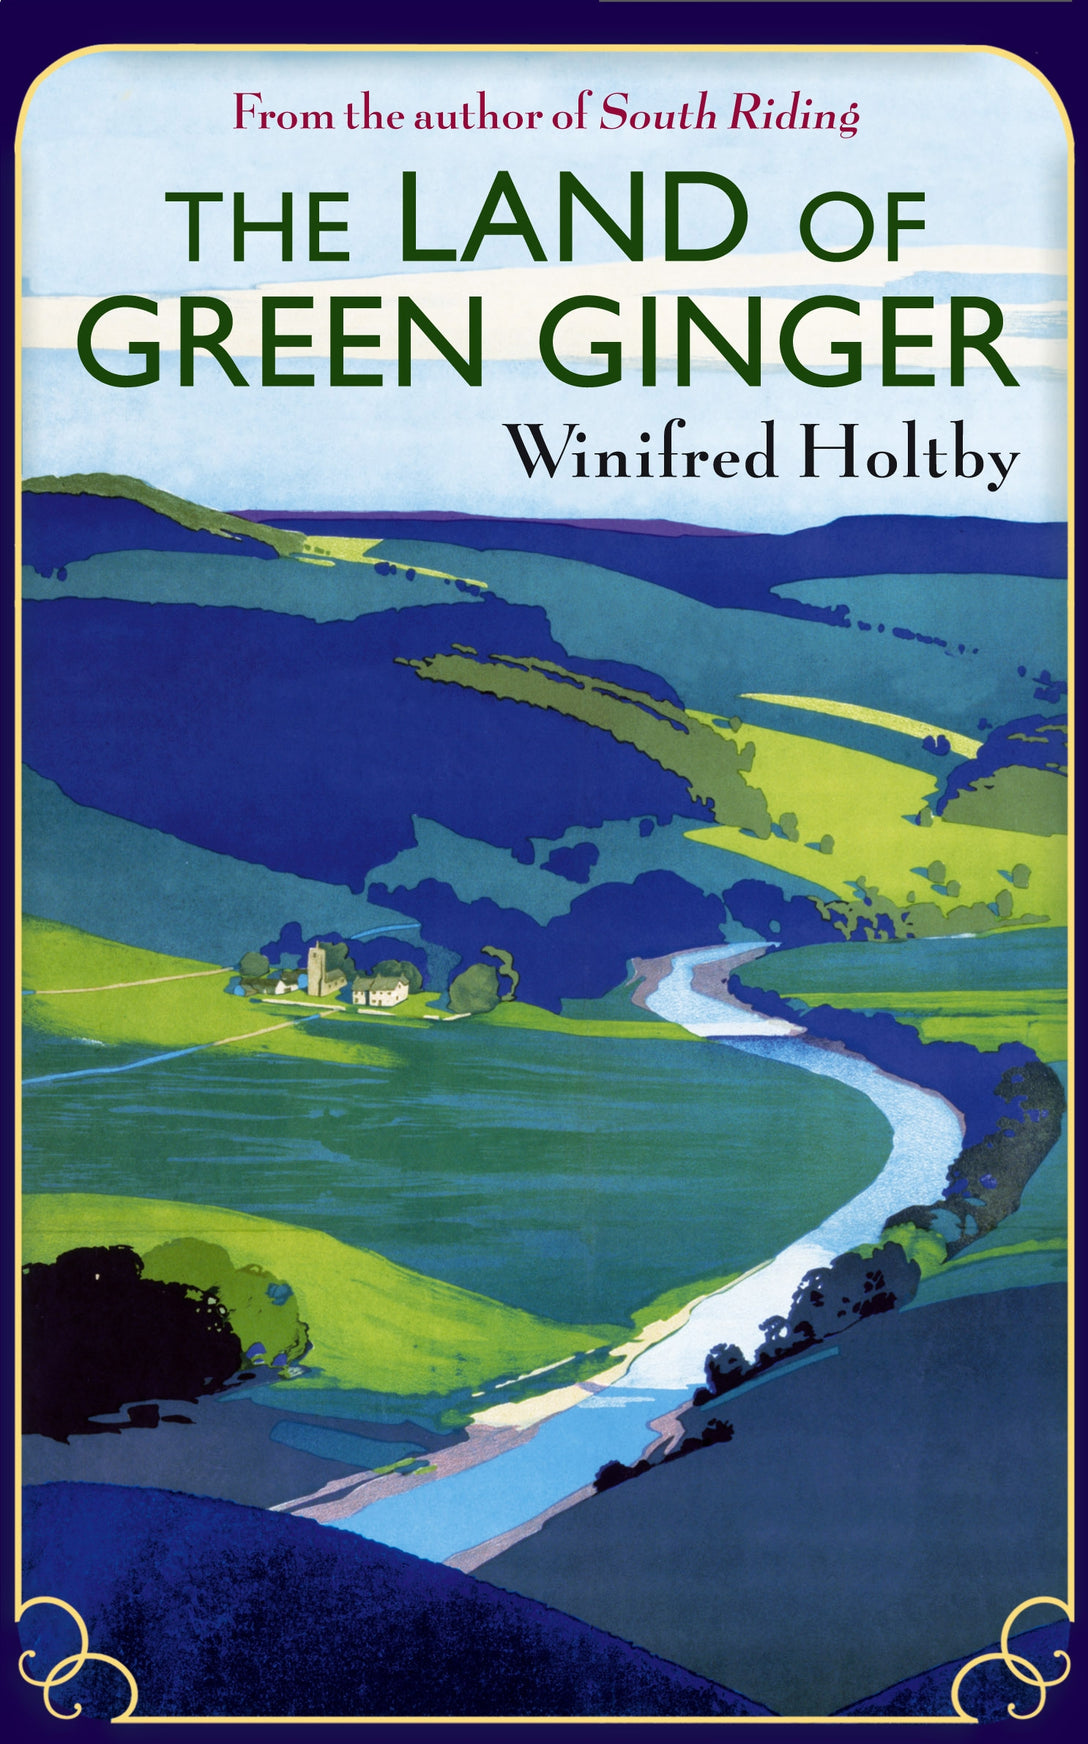 The Land Of Green Ginger by Winifred Holtby